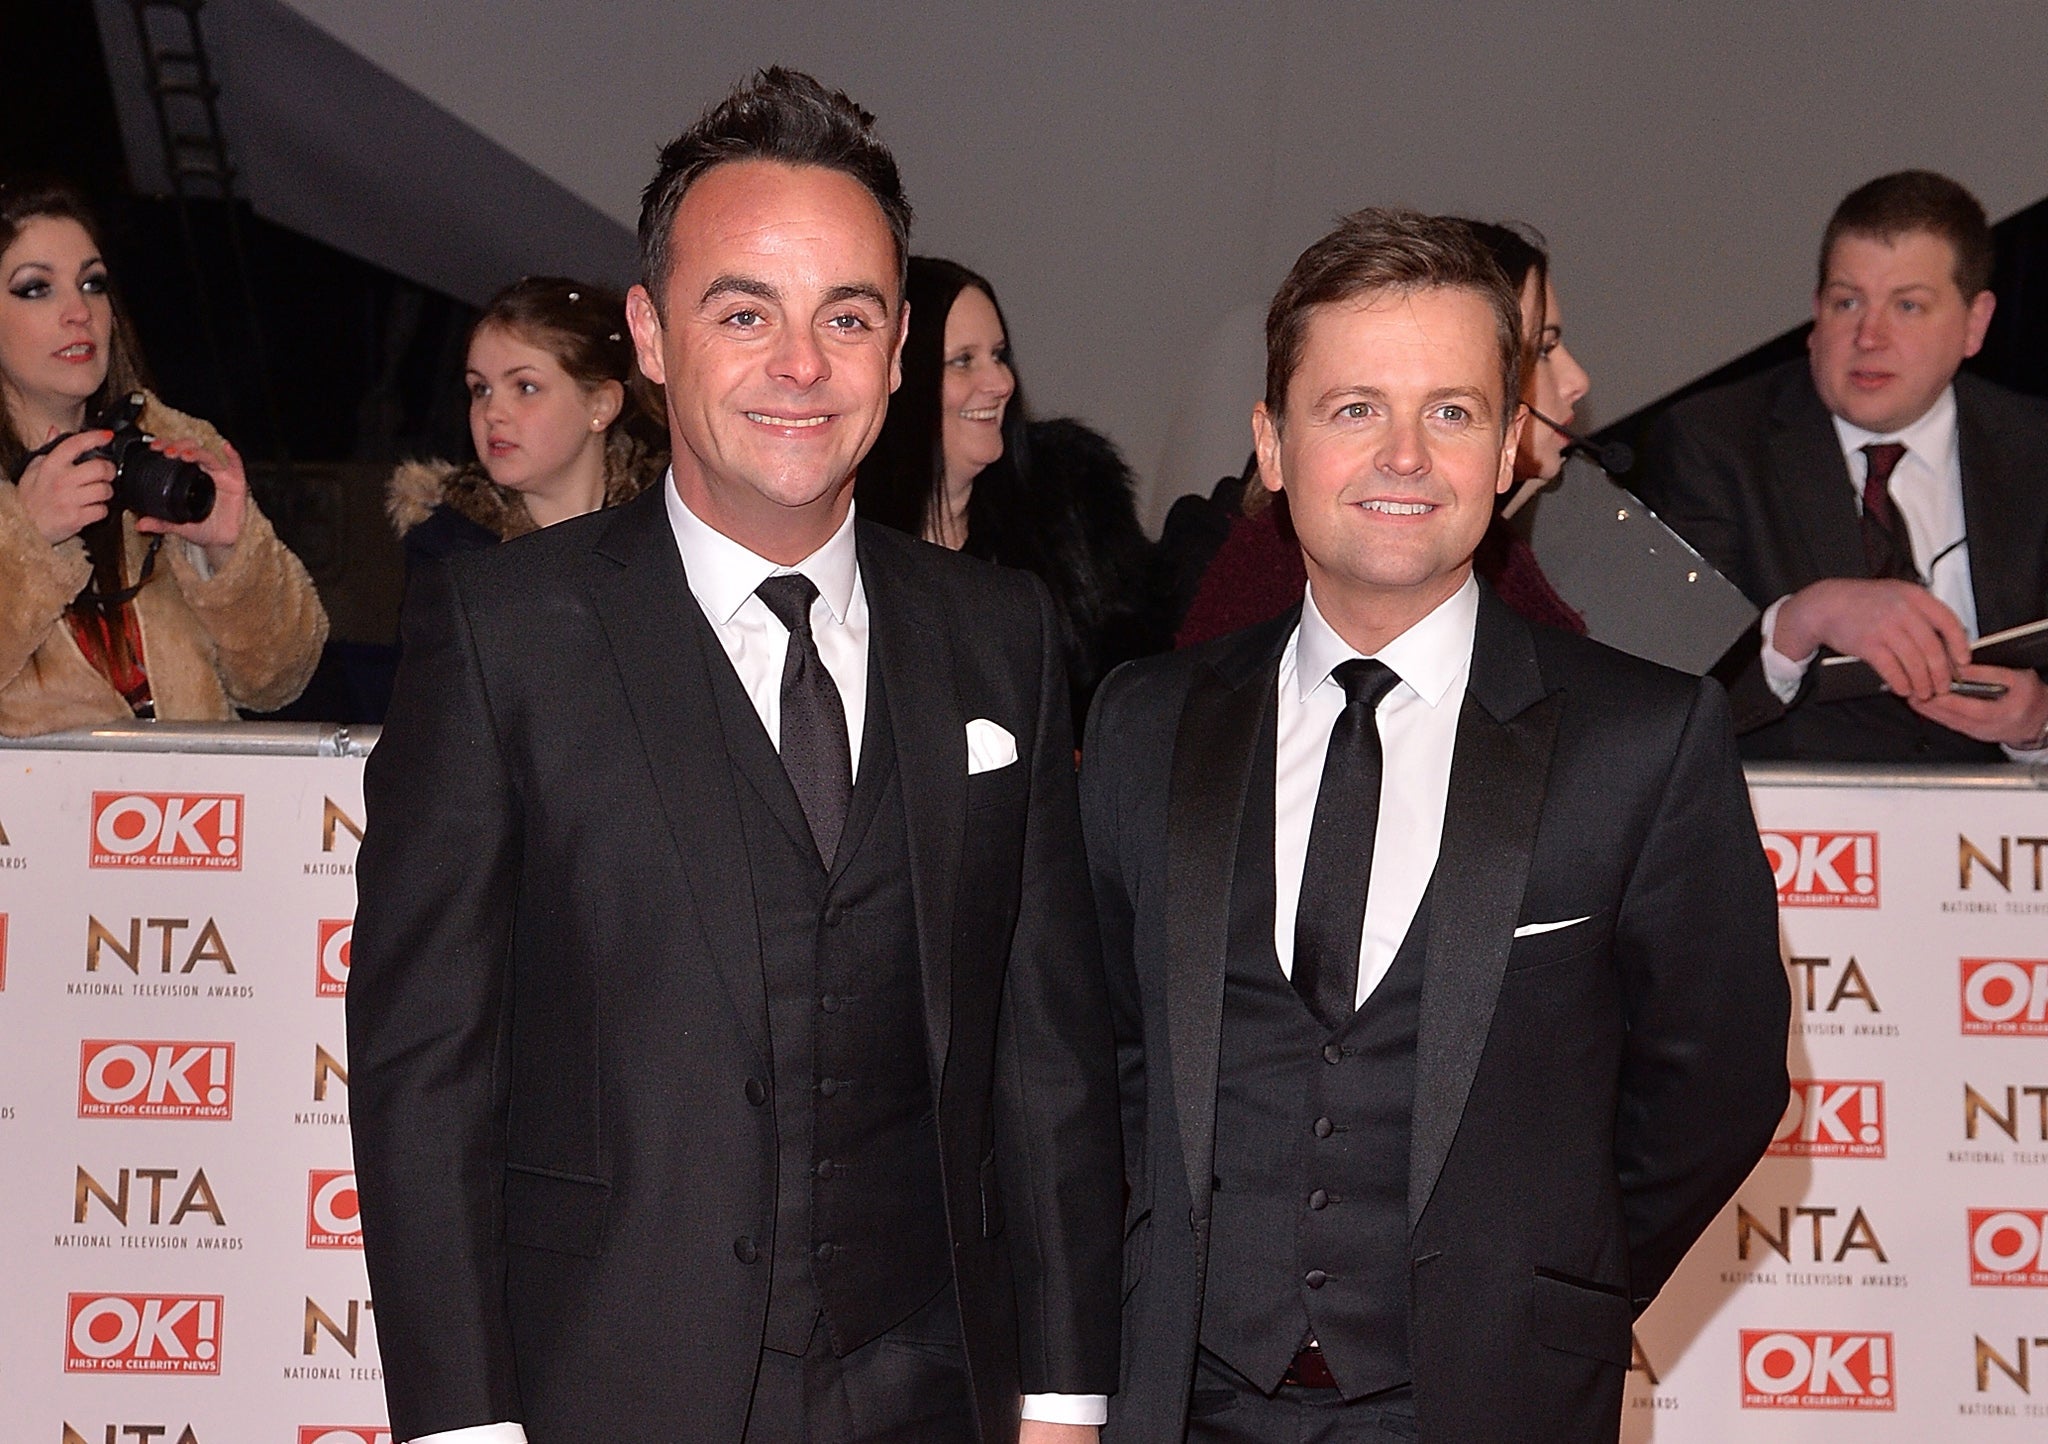 NTA presenters Ant and Dec on the red carpet